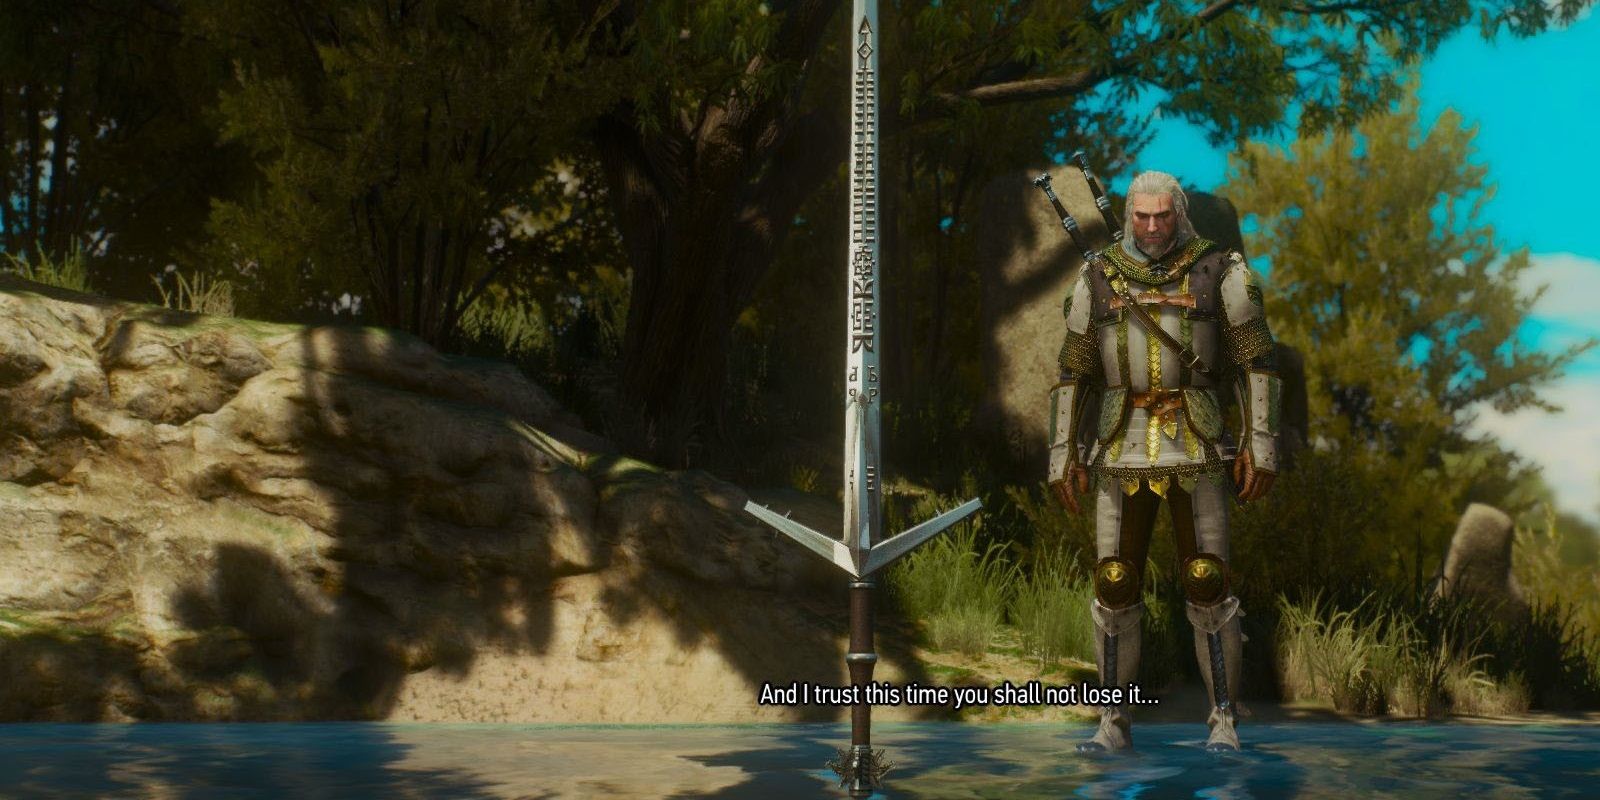 Aerondight Sword floats in mid air being gifted to Geralt